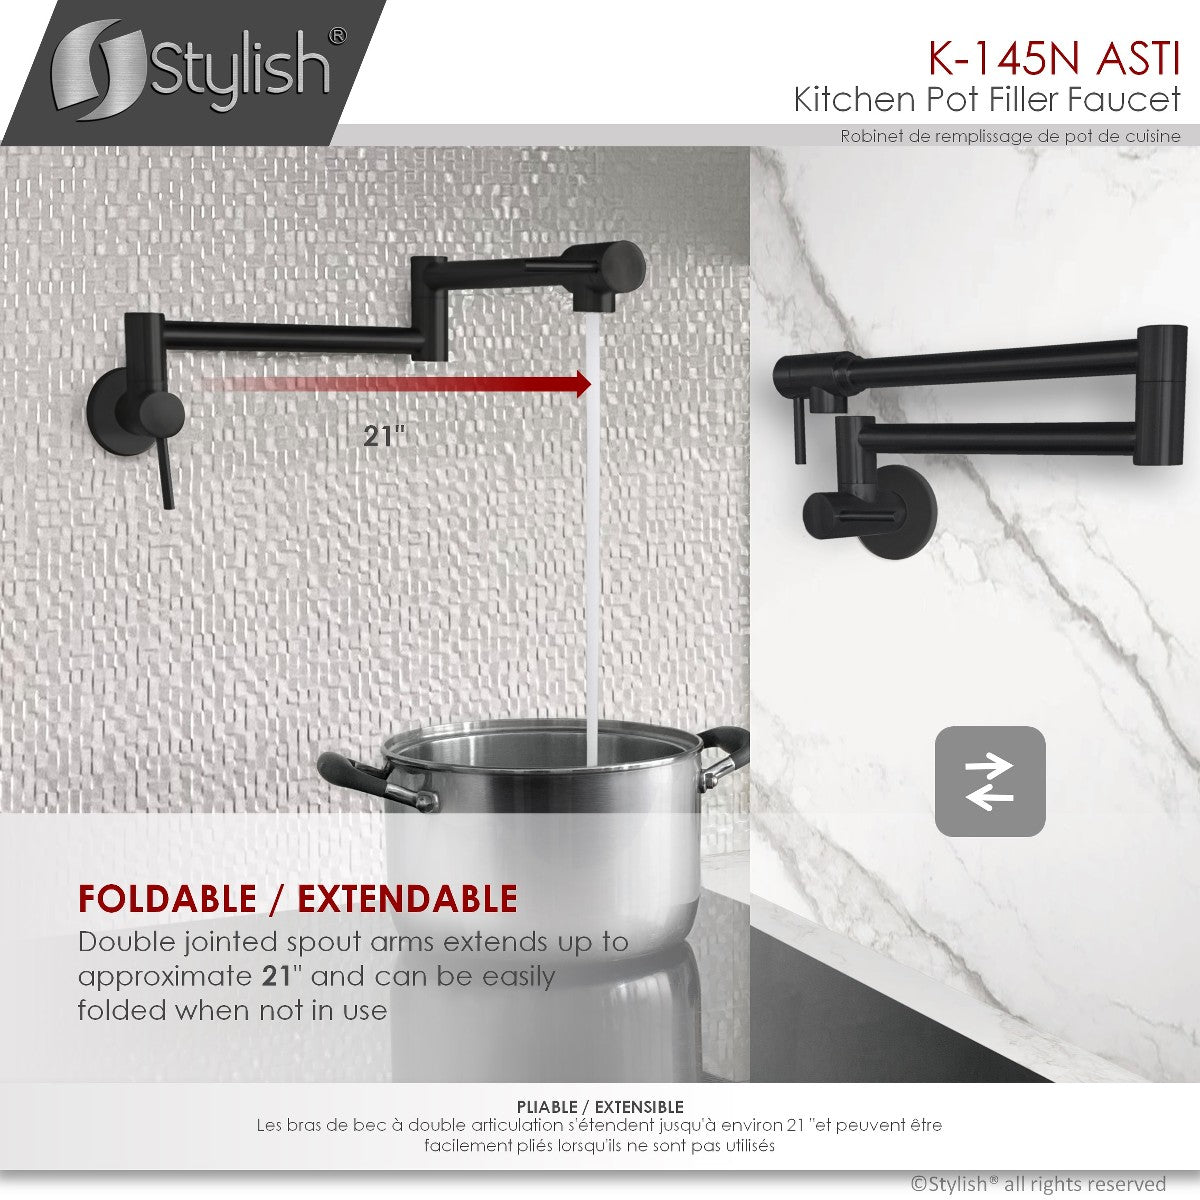 Stylish ANTI Stainless Steel Wall Mount Pot Filler Folding Stretchable with Single Hole Two Handles - Matte Black Finish K-145N